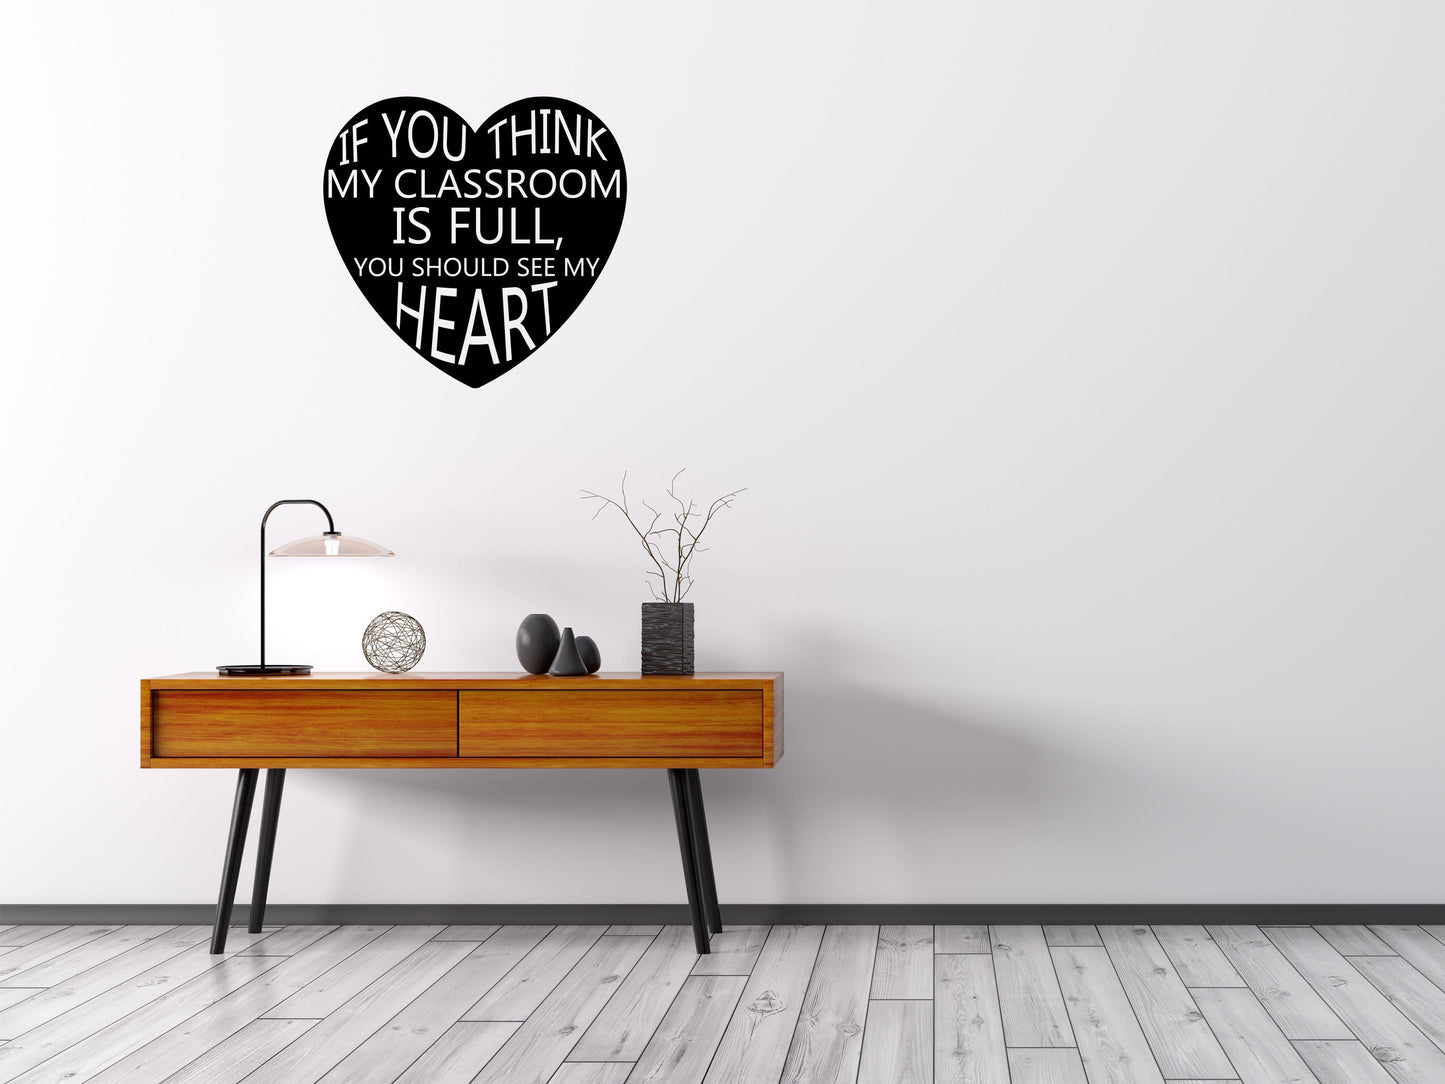 Classroom Decal Office Wall Stickers- Inspirational Wall Decals Vinyl Wall Decal Done 